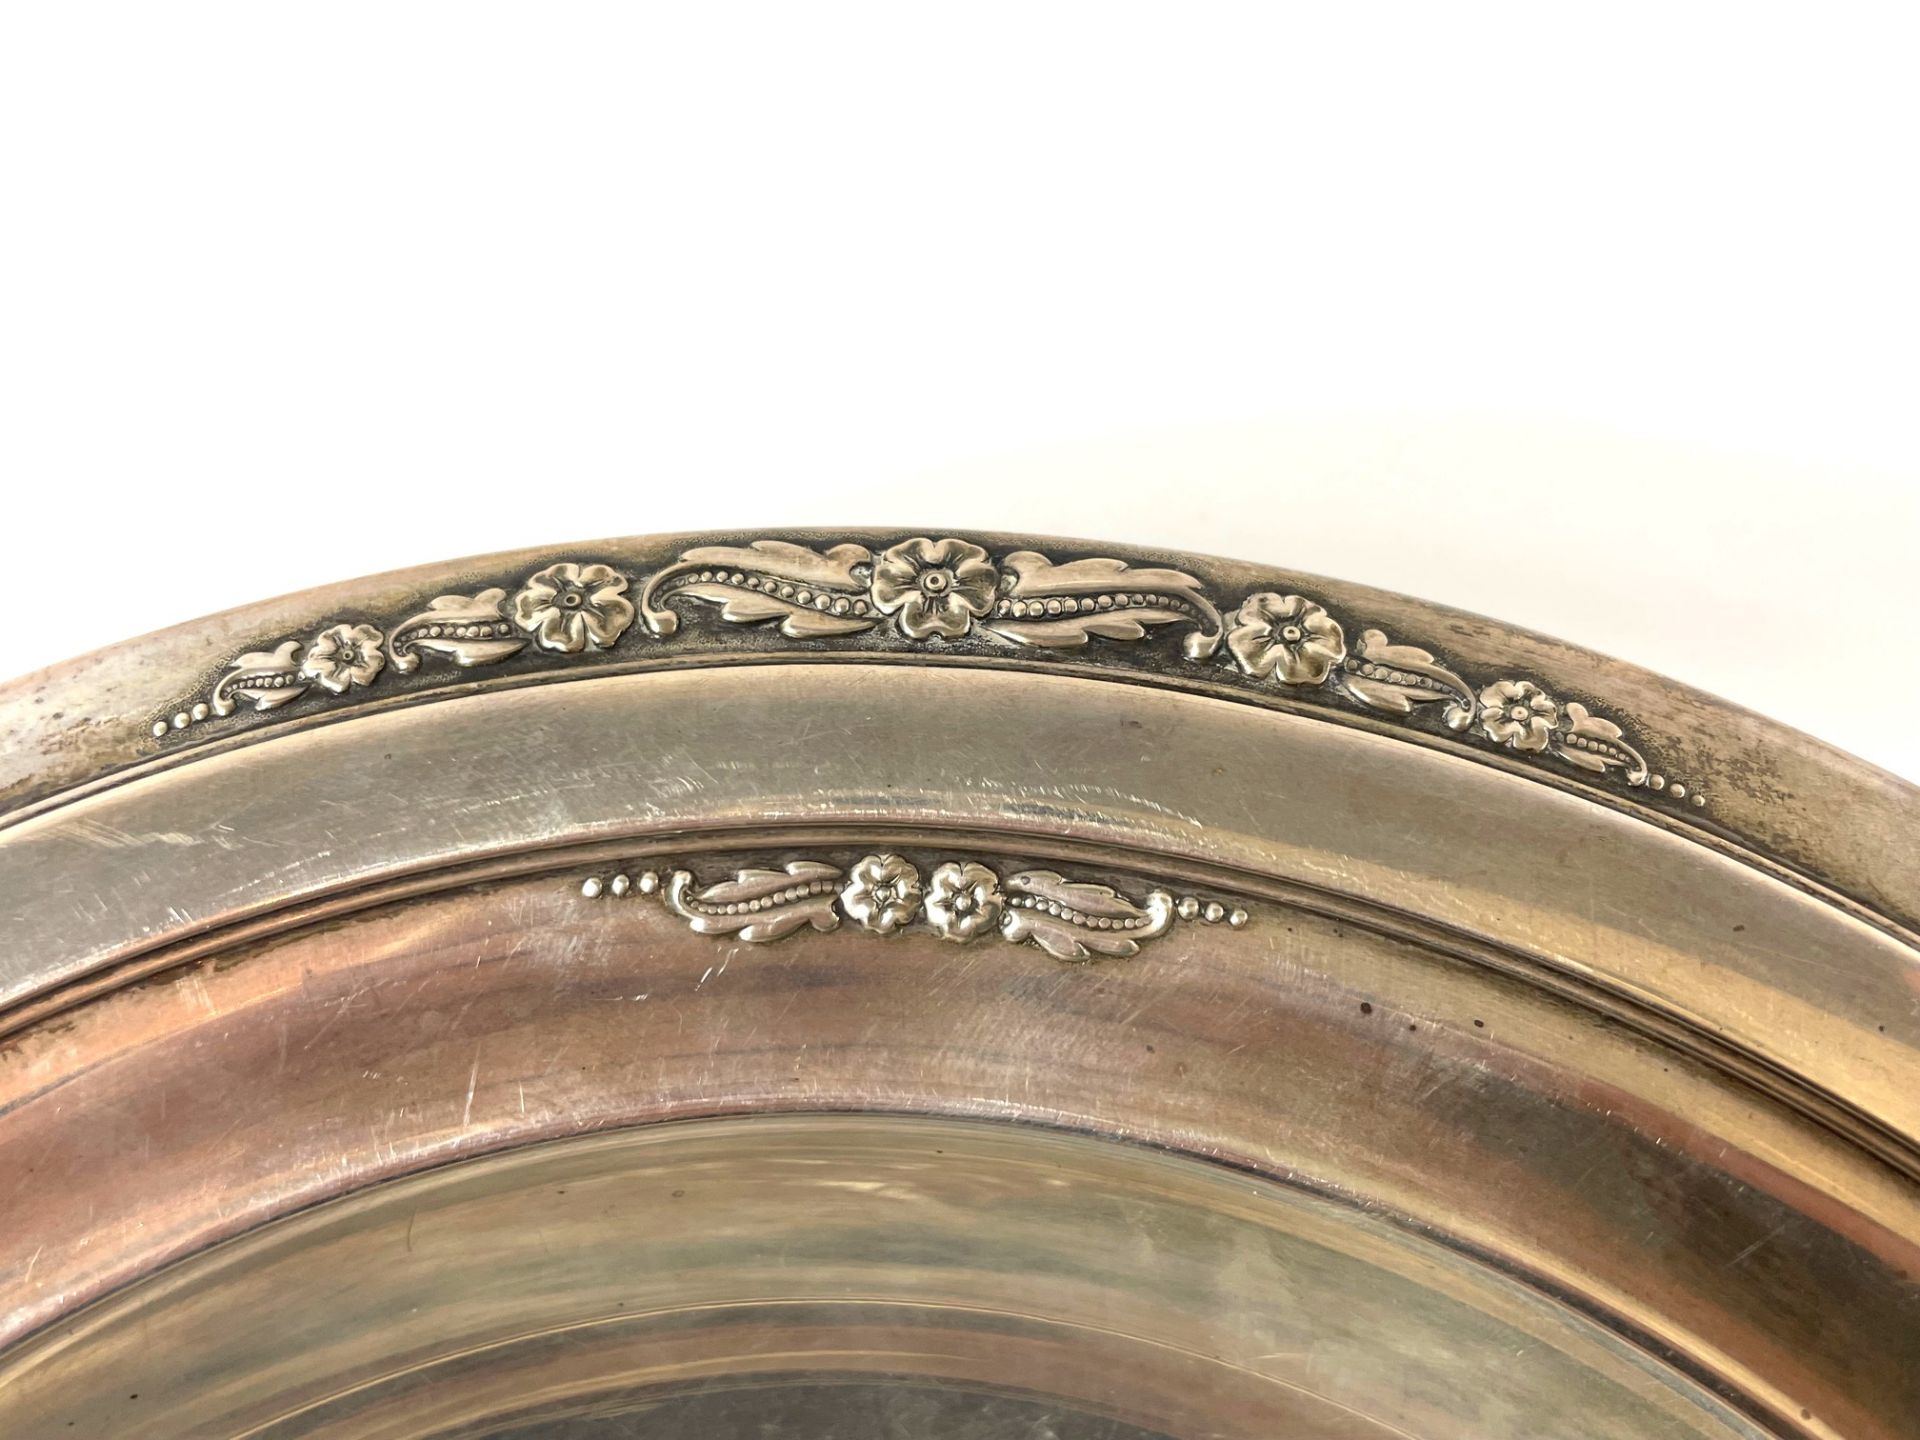 Bowl in 925 silver with floral decoration - Image 3 of 6